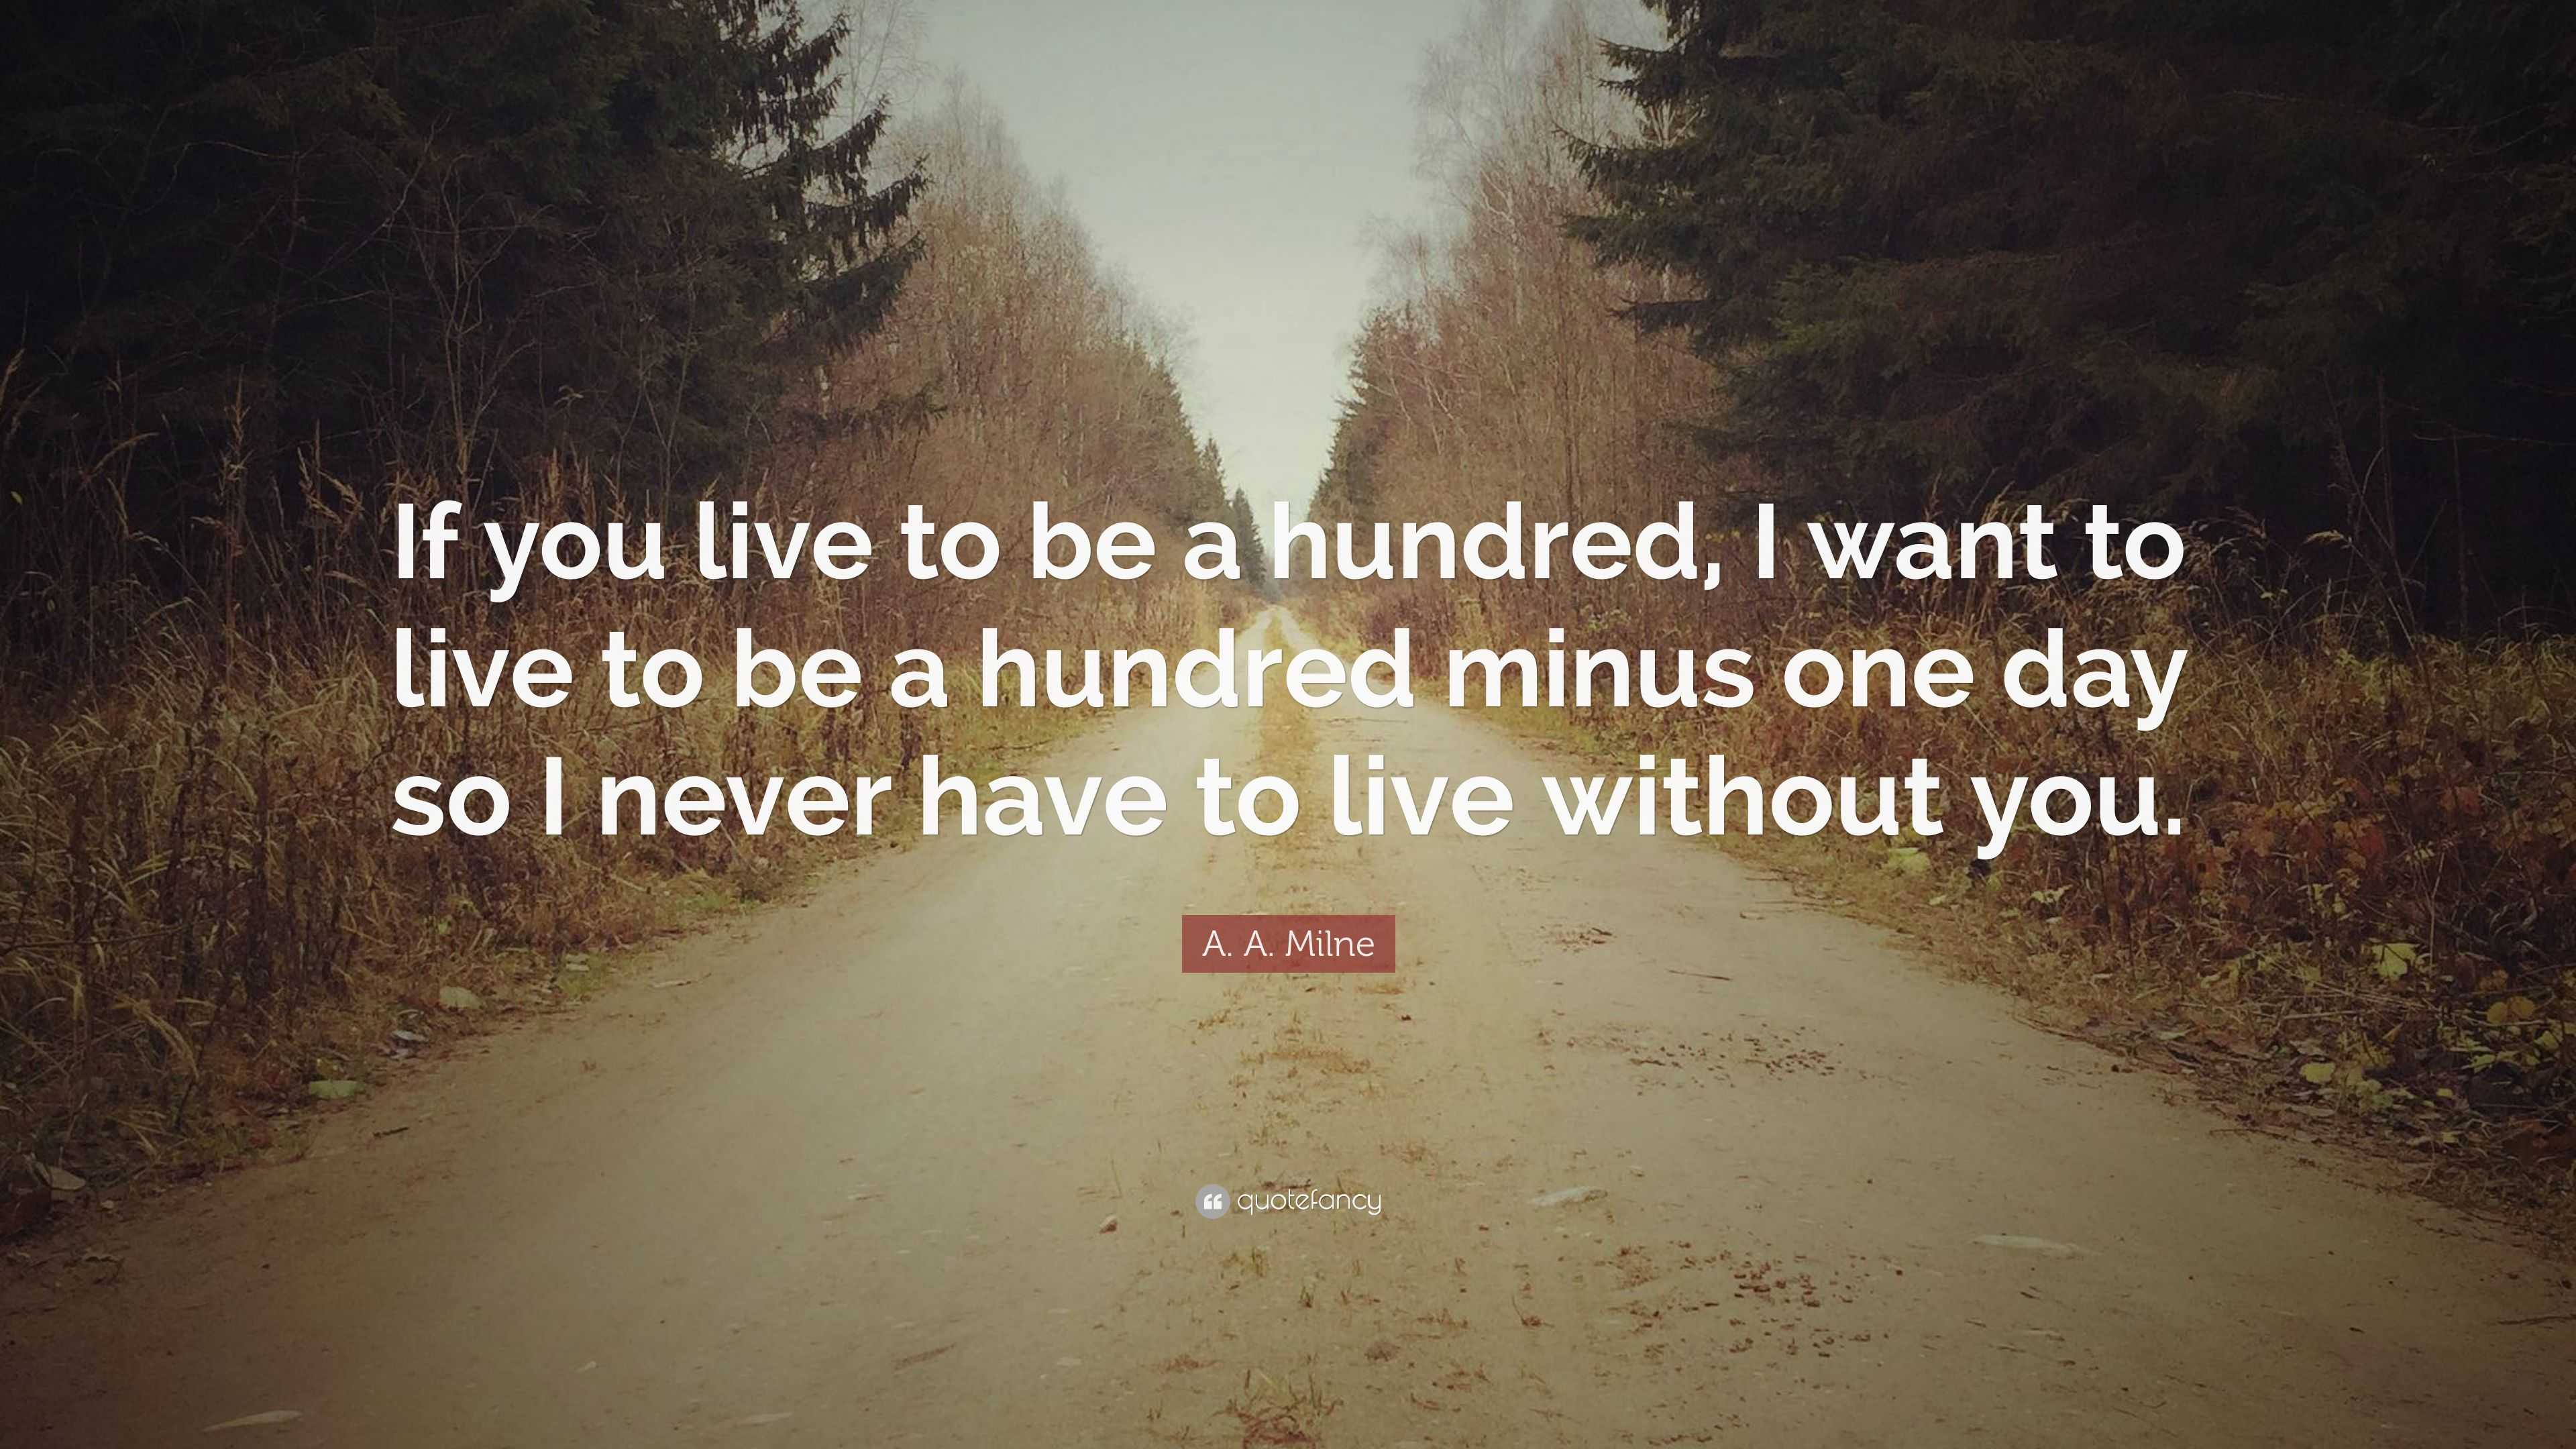 A. A. Milne Quote: “If you live to be a hundred, I want to live to be a ...